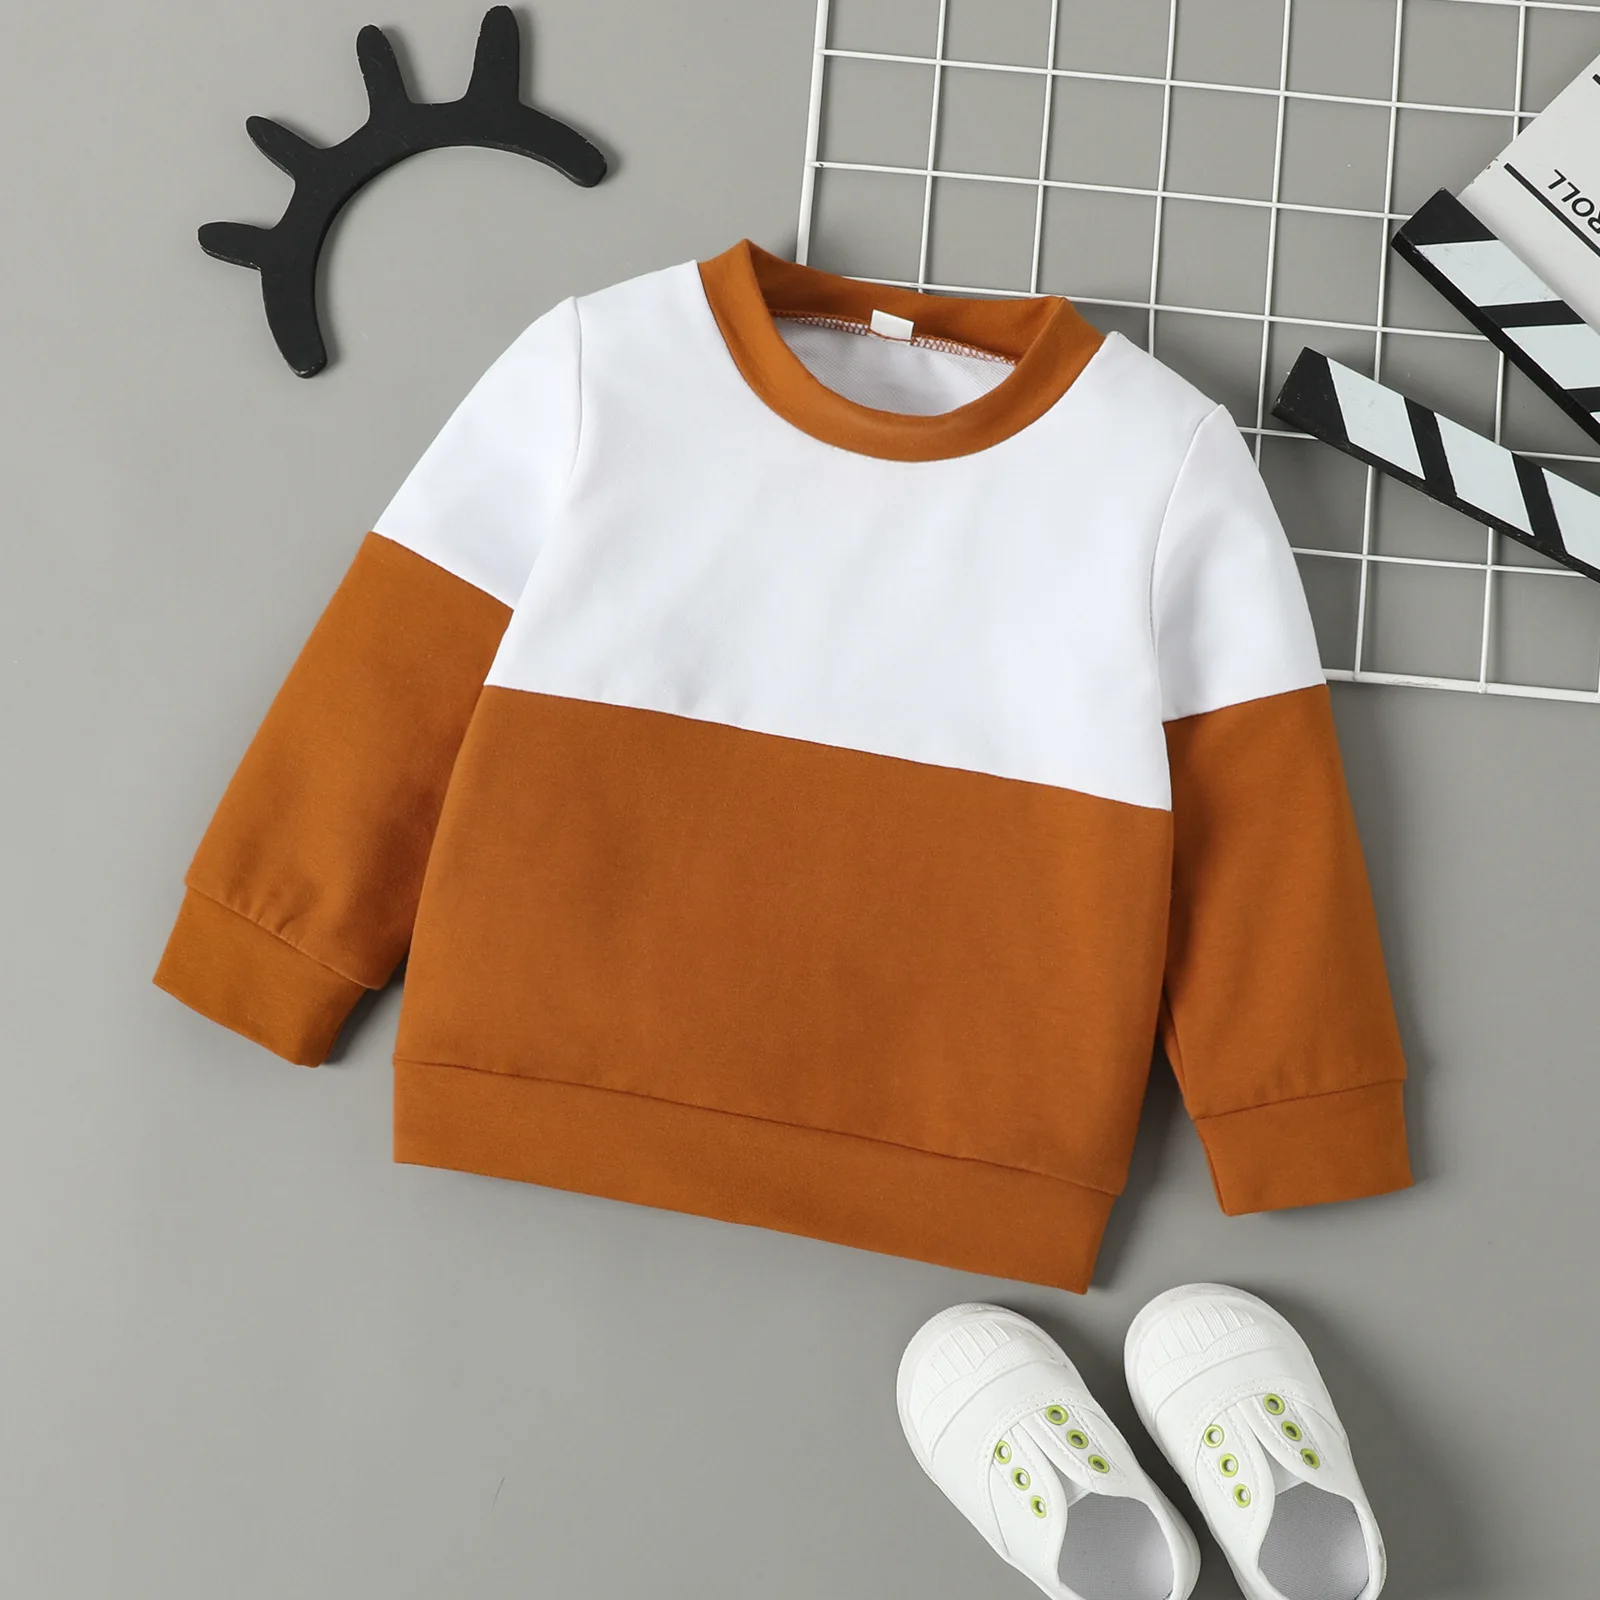 New style autumn boys color matching sweatshirt suit fashion casual pullover crew neck sweatshirt sets for kids